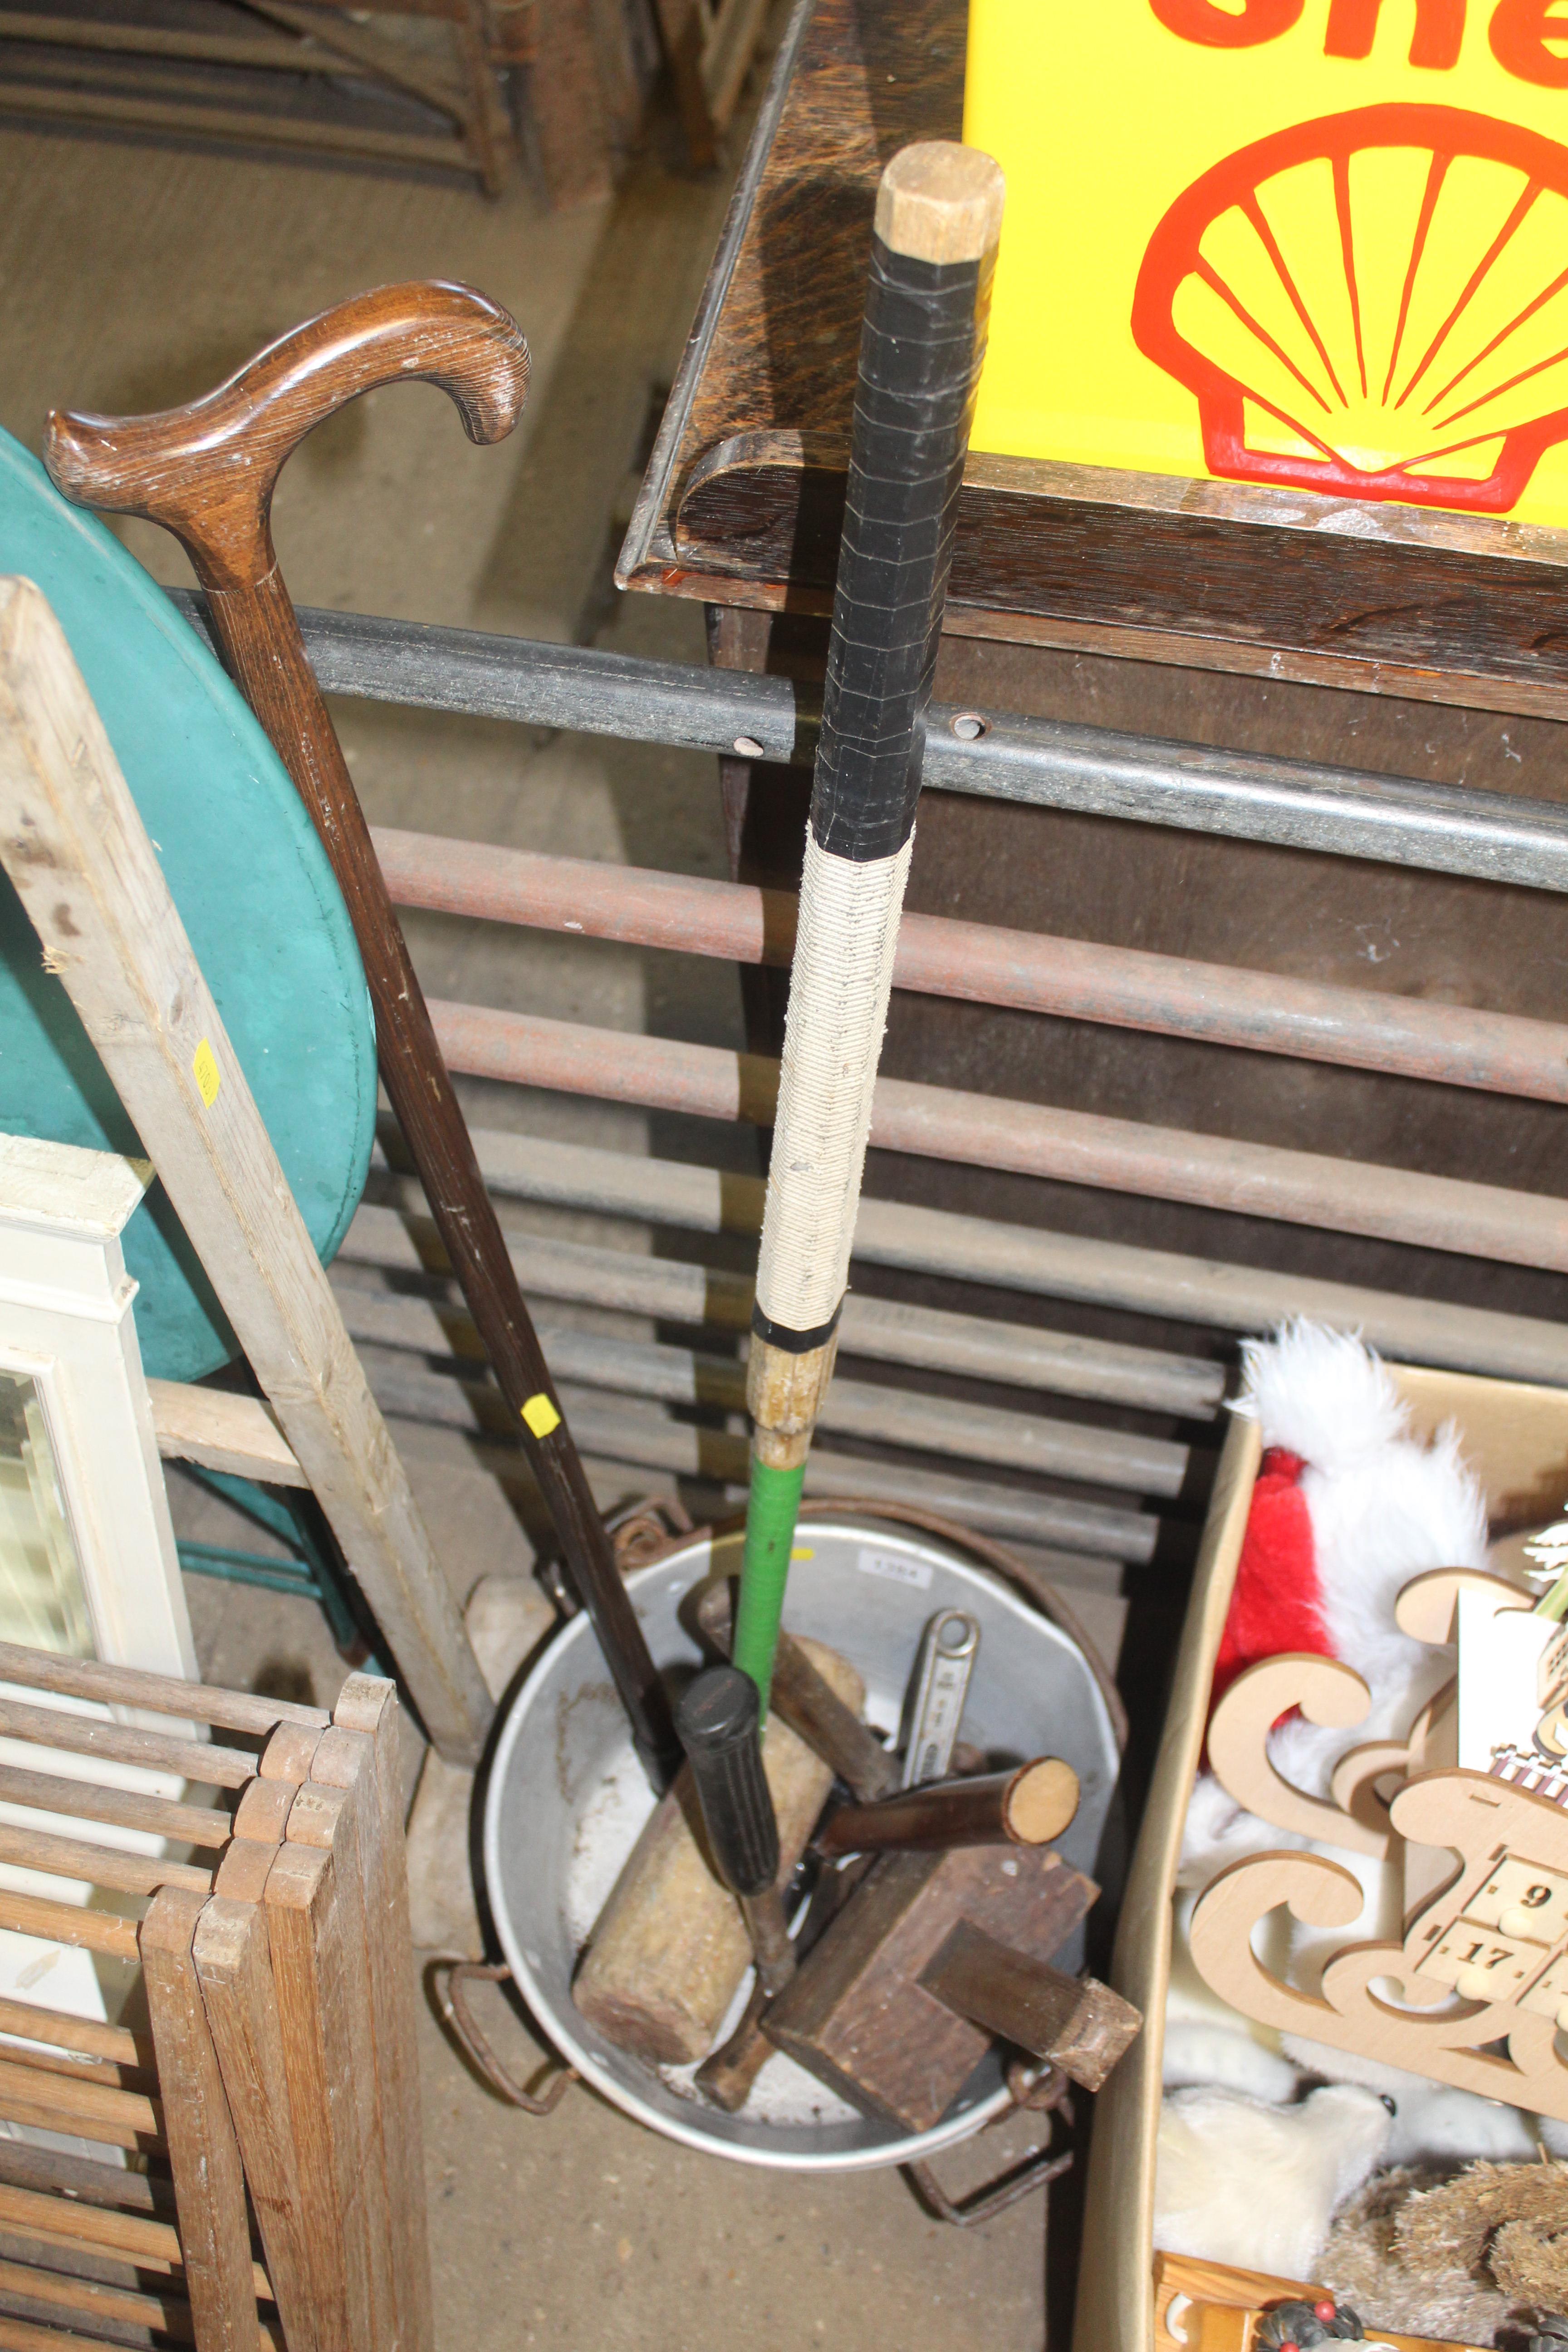 Two metal cooking pots, a walking stick, a mallet,